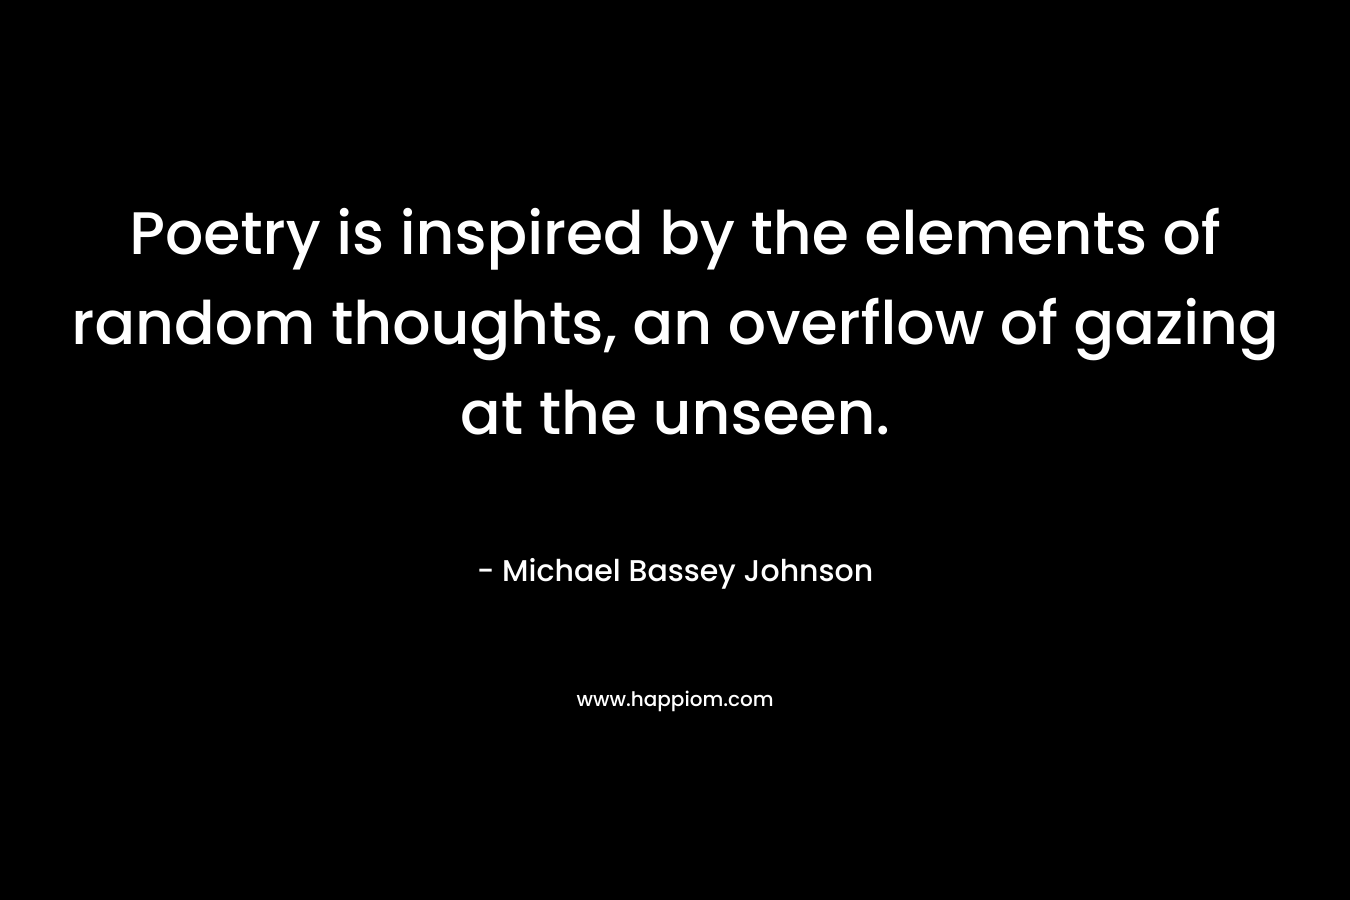 Poetry is inspired by the elements of random thoughts, an overflow of gazing at the unseen. – Michael Bassey Johnson